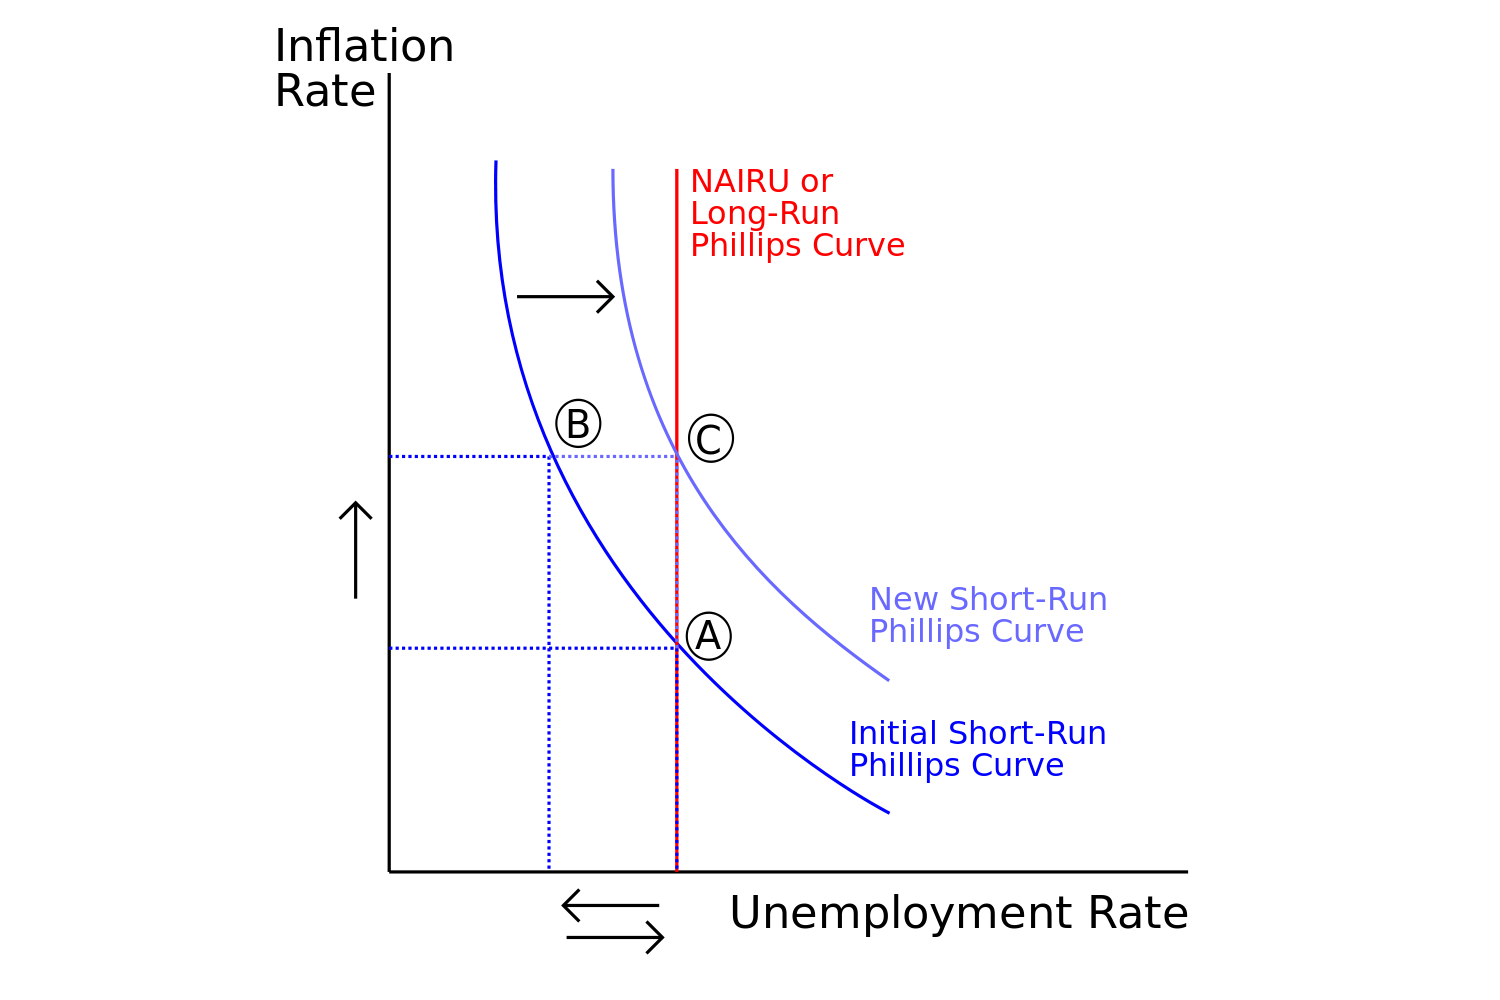 Remembering The Phillips Curve